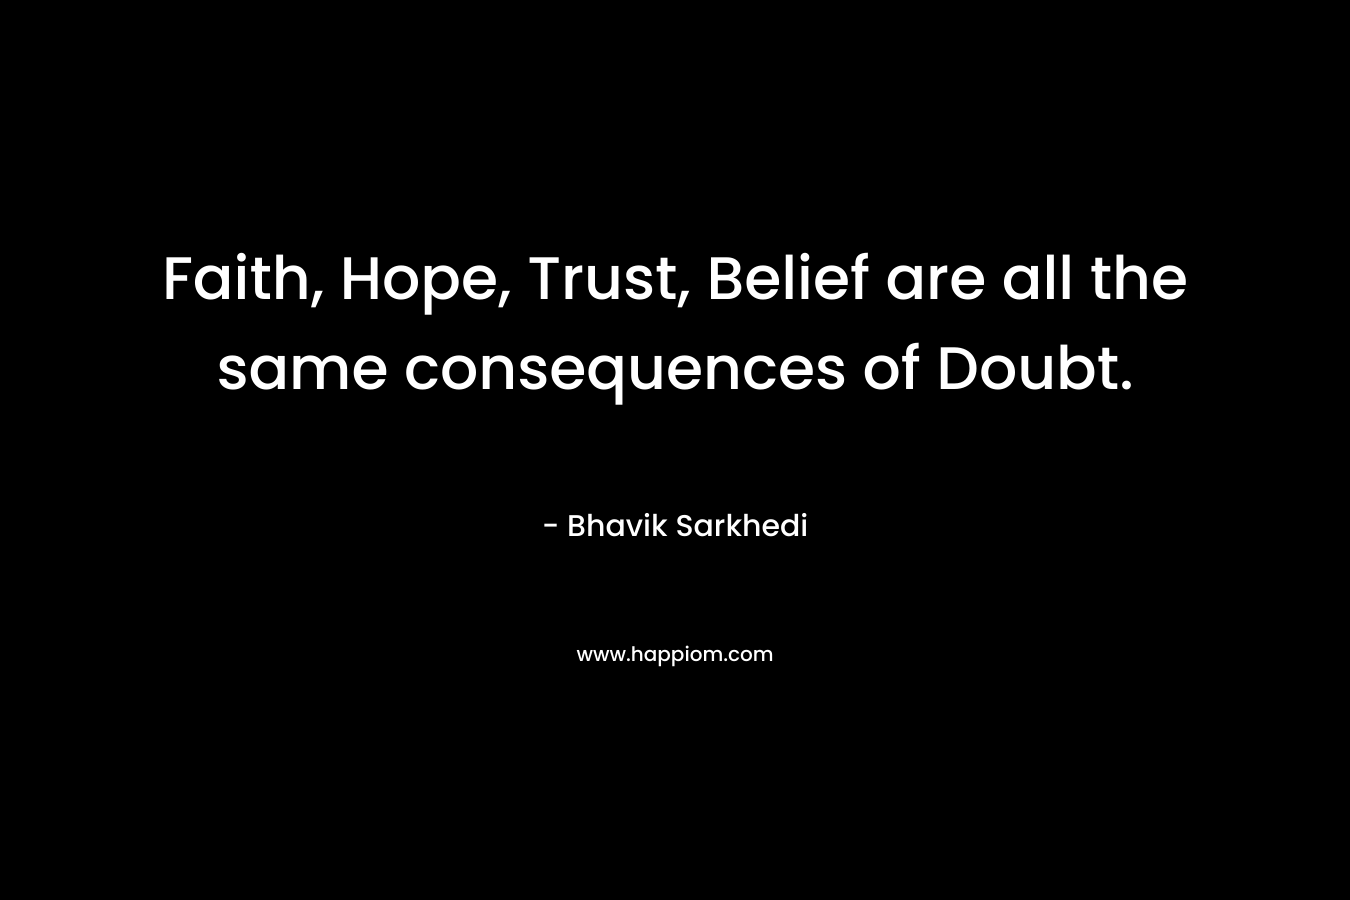 Faith, Hope, Trust, Belief are all the same consequences of Doubt. – Bhavik Sarkhedi